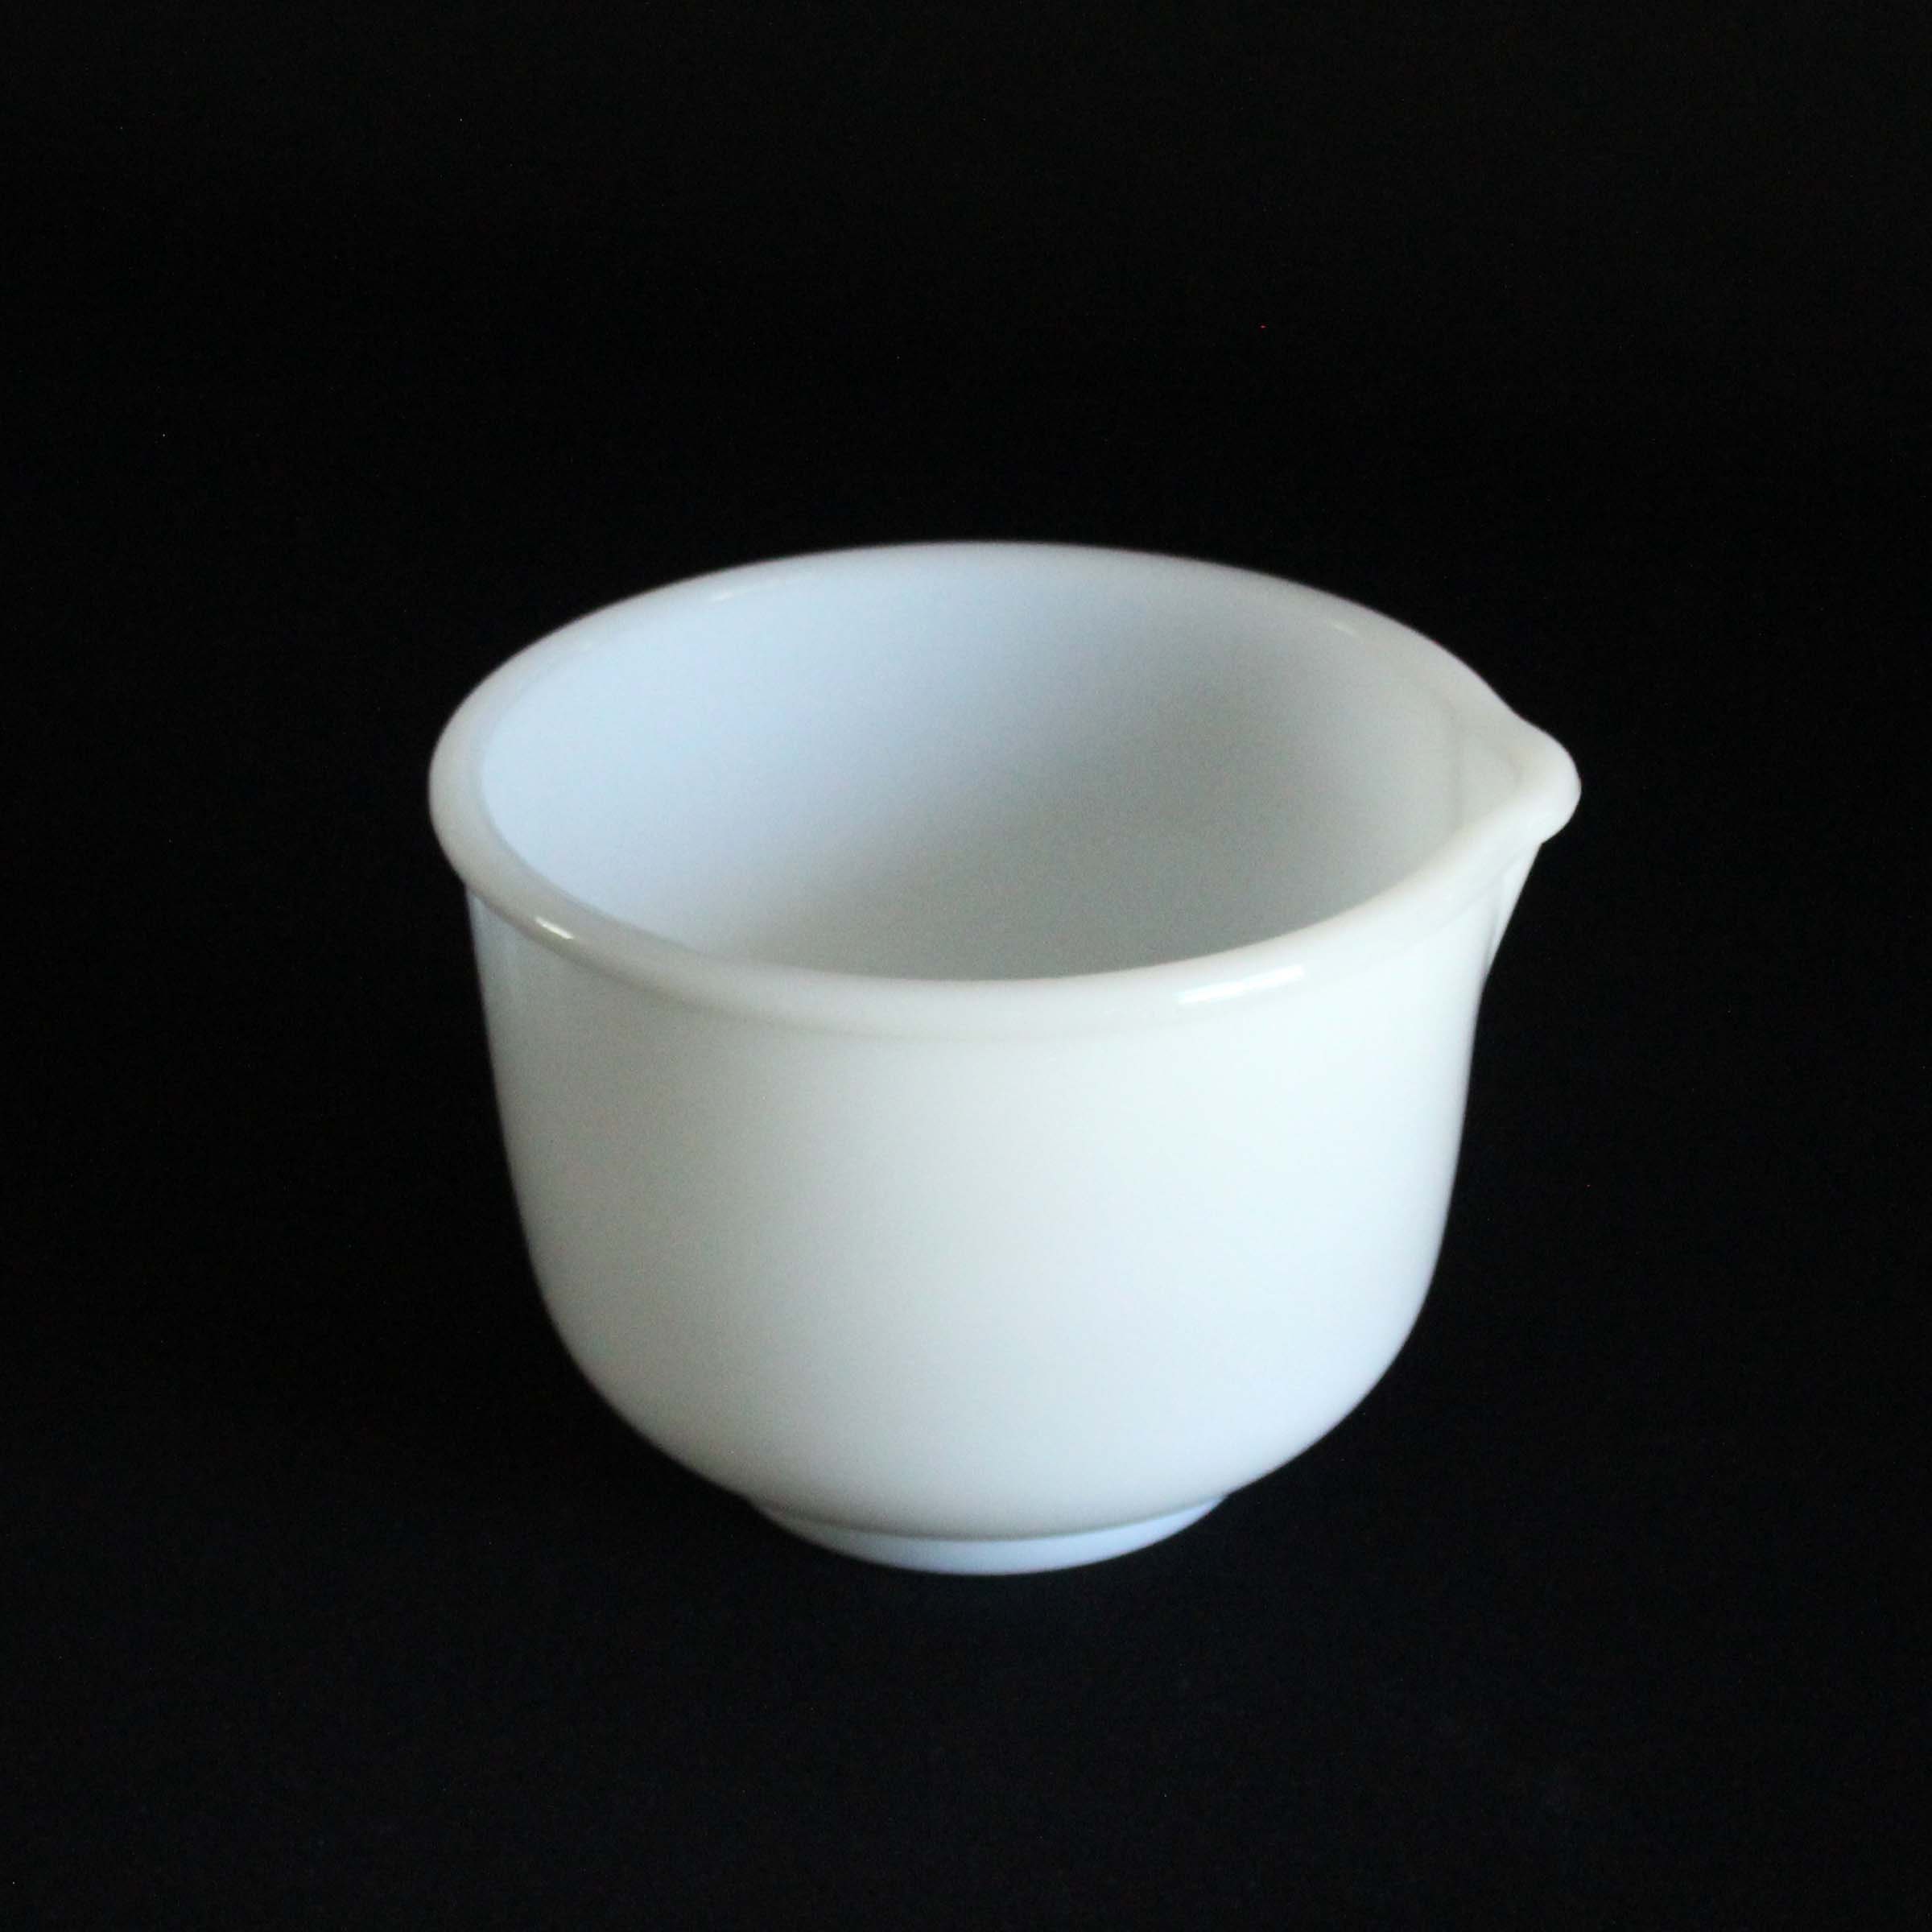 Glasbake 17 White Milk Glass Large Mixing Bowl With Pour Spout